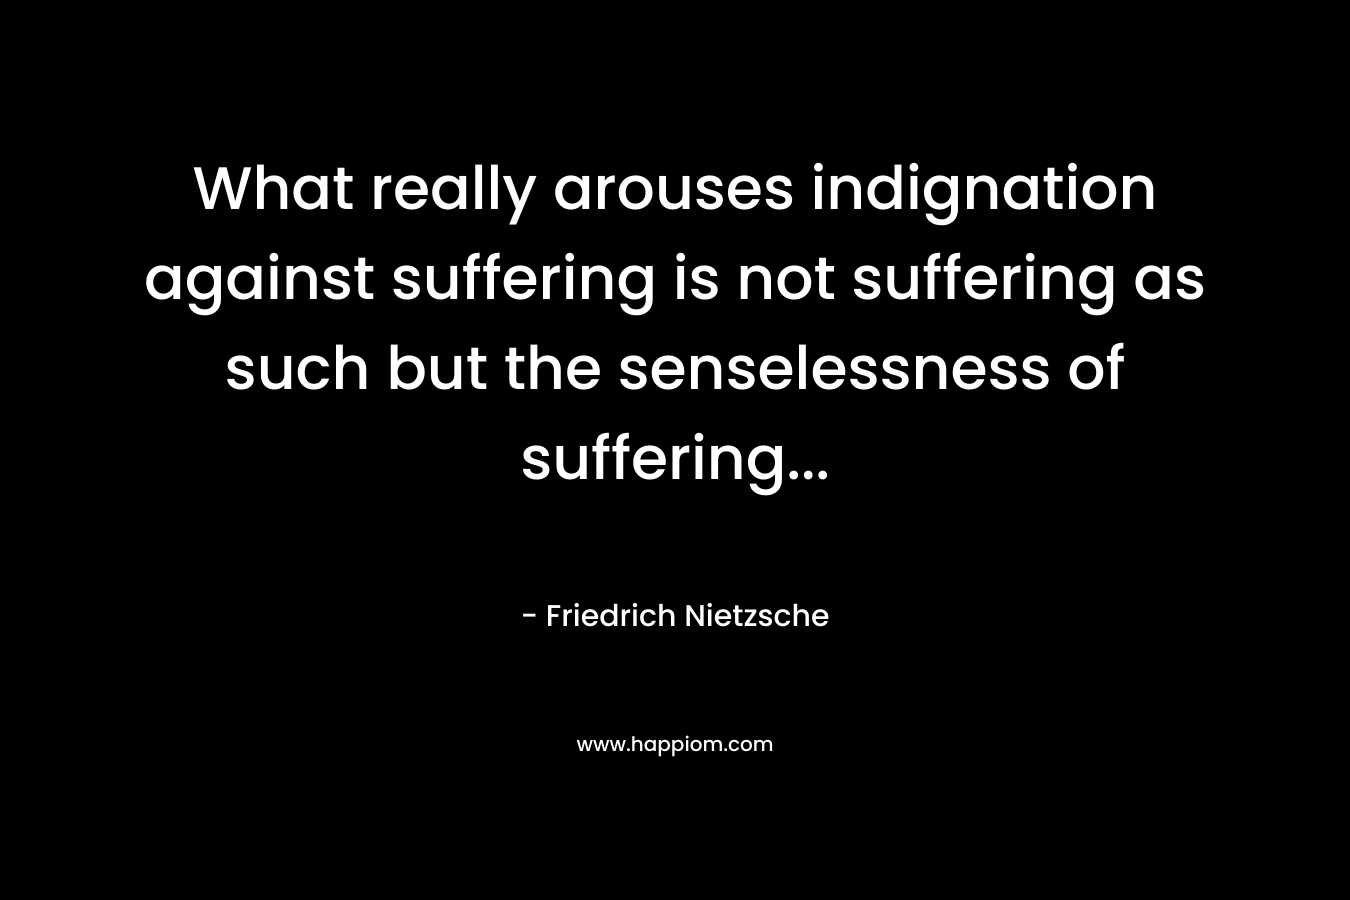 What really arouses indignation against suffering is not suffering as such but the senselessness of suffering...